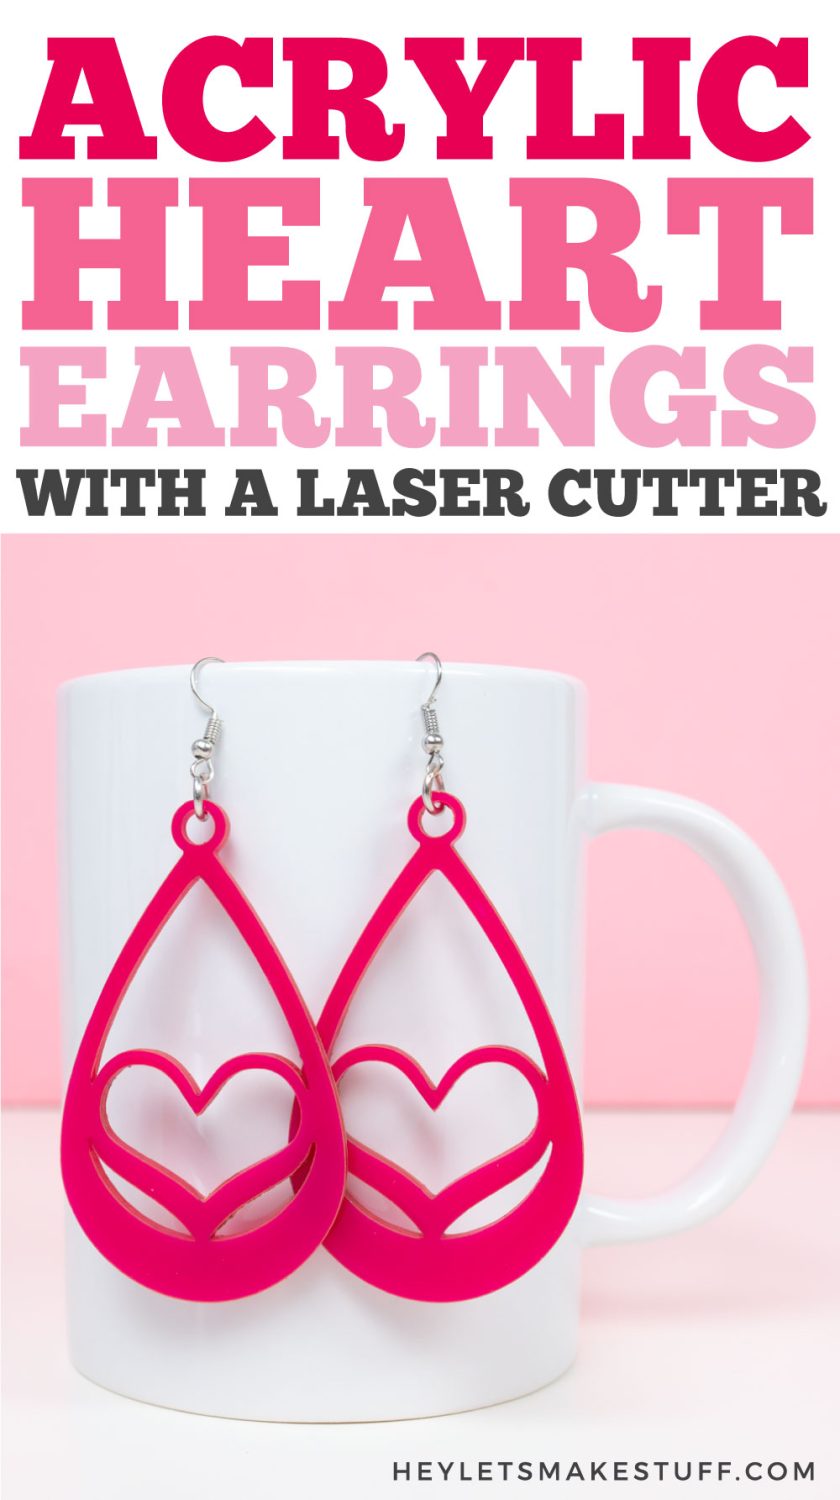 Acrylic Heart Earrings made with a Laser Cutter pin image.